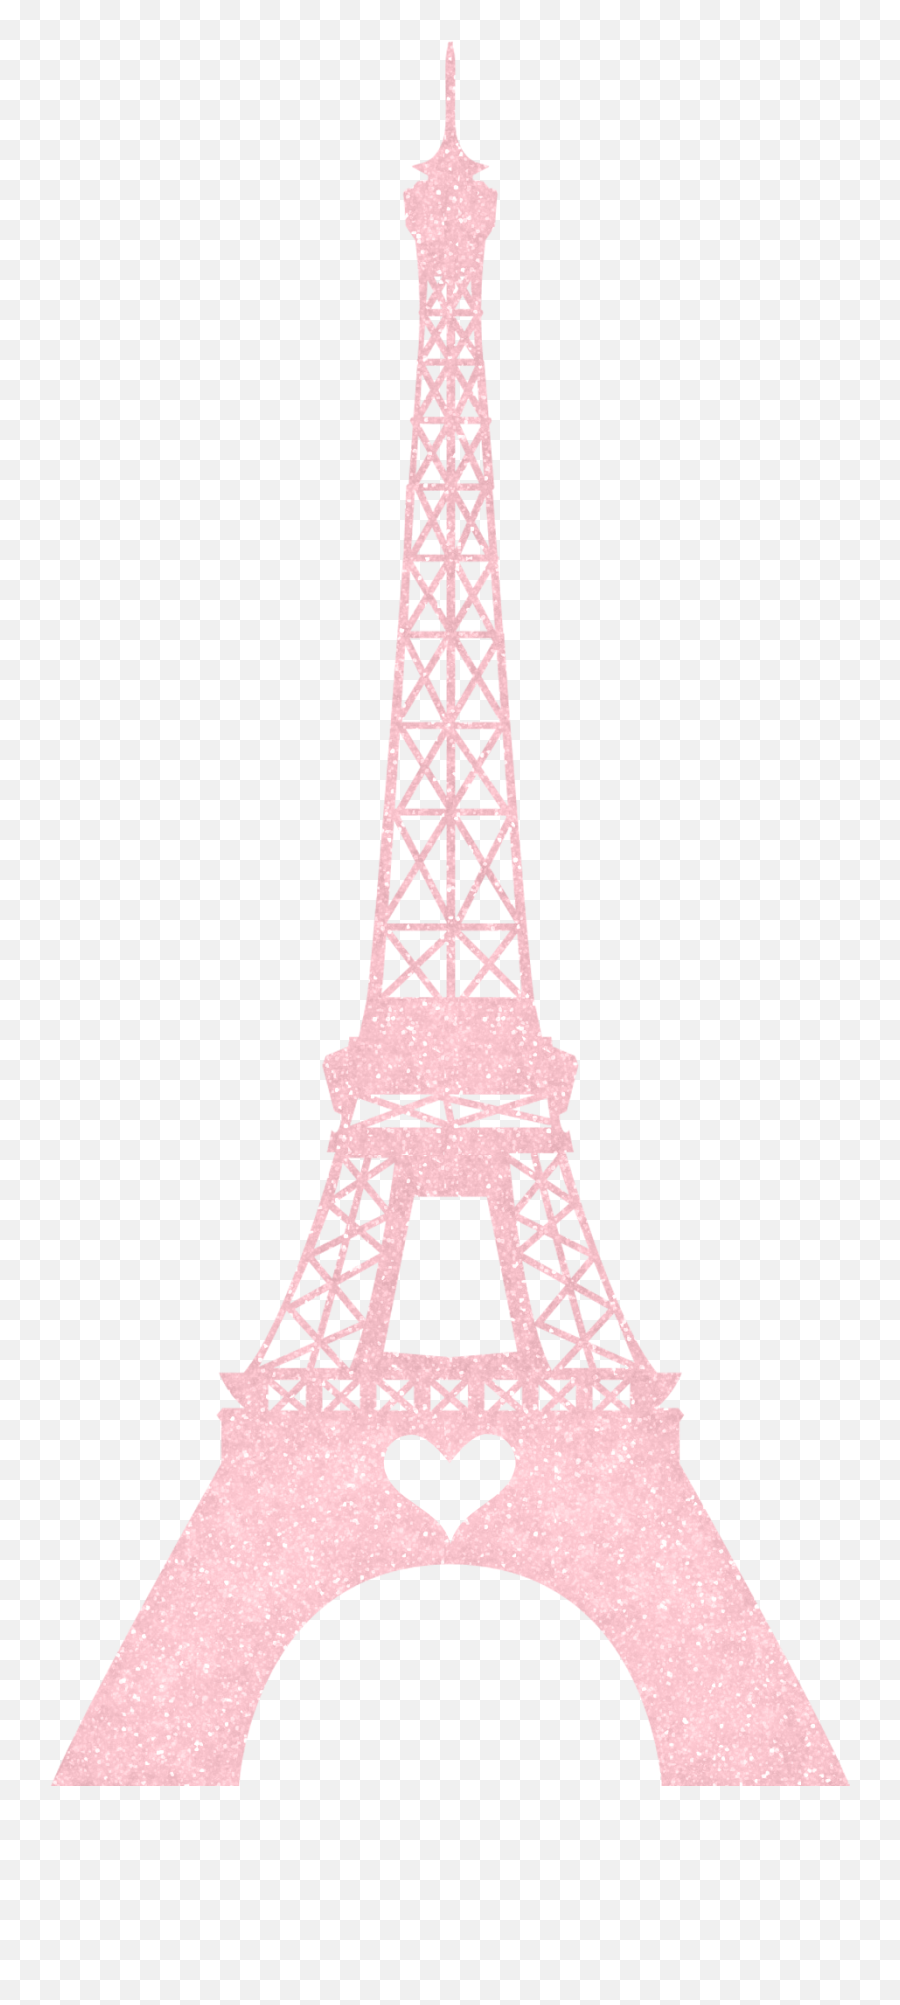 Tborges Ohsnap Tower Png - Arcelormittal Orbit Emoji,Eiffel Tower Png